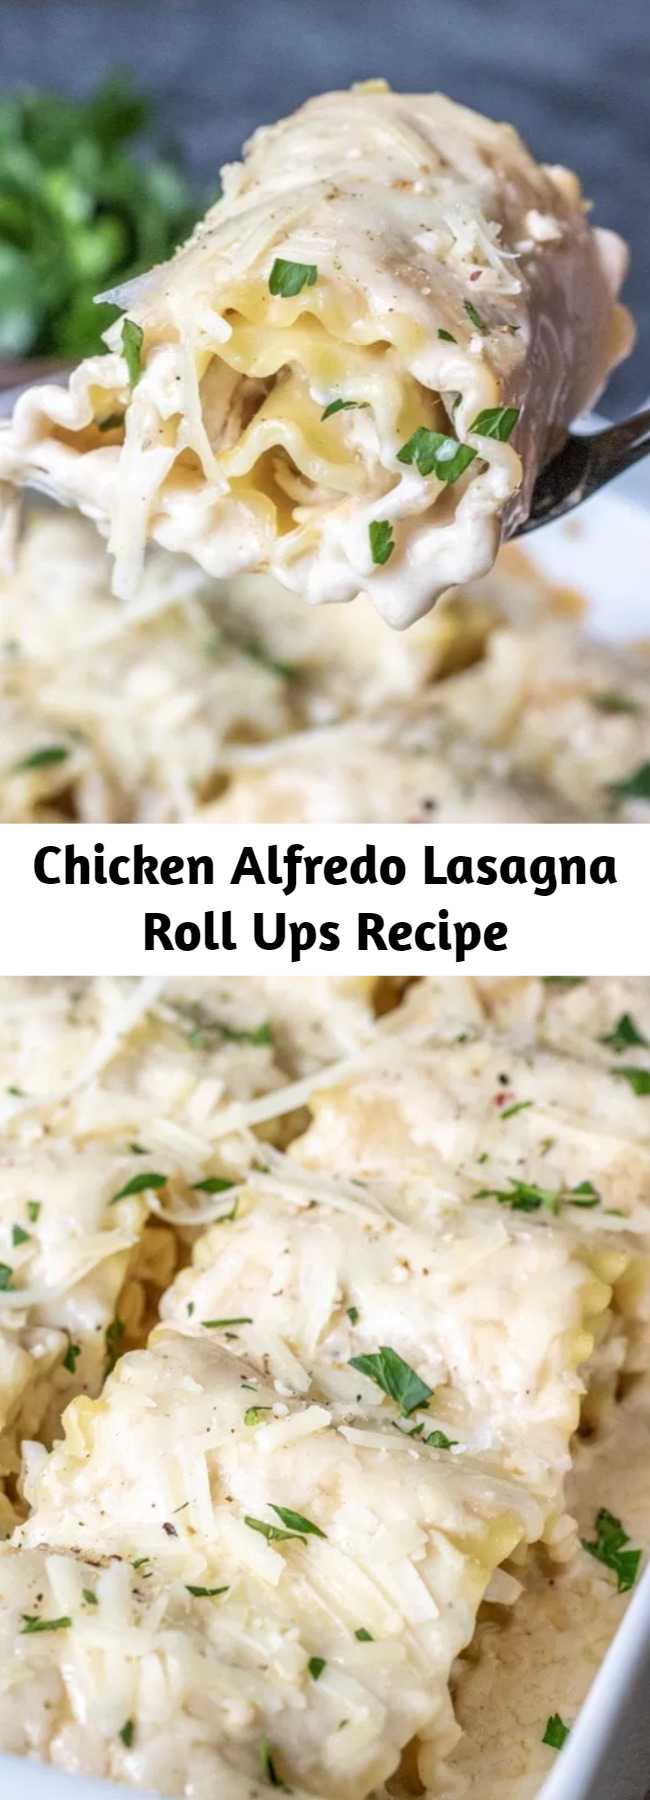 Chicken Alfredo Lasagna Roll Ups Recipe - These Chicken Alfredo Lasagna Roll Ups are all of the flavors of classic Chicken Alfredo rolled up into lasagna noodles to make easy lasagna rolls. A simple weeknight dinner recipe that the whole family will love. #lasagna #chickenalfredo #pasta #casserole